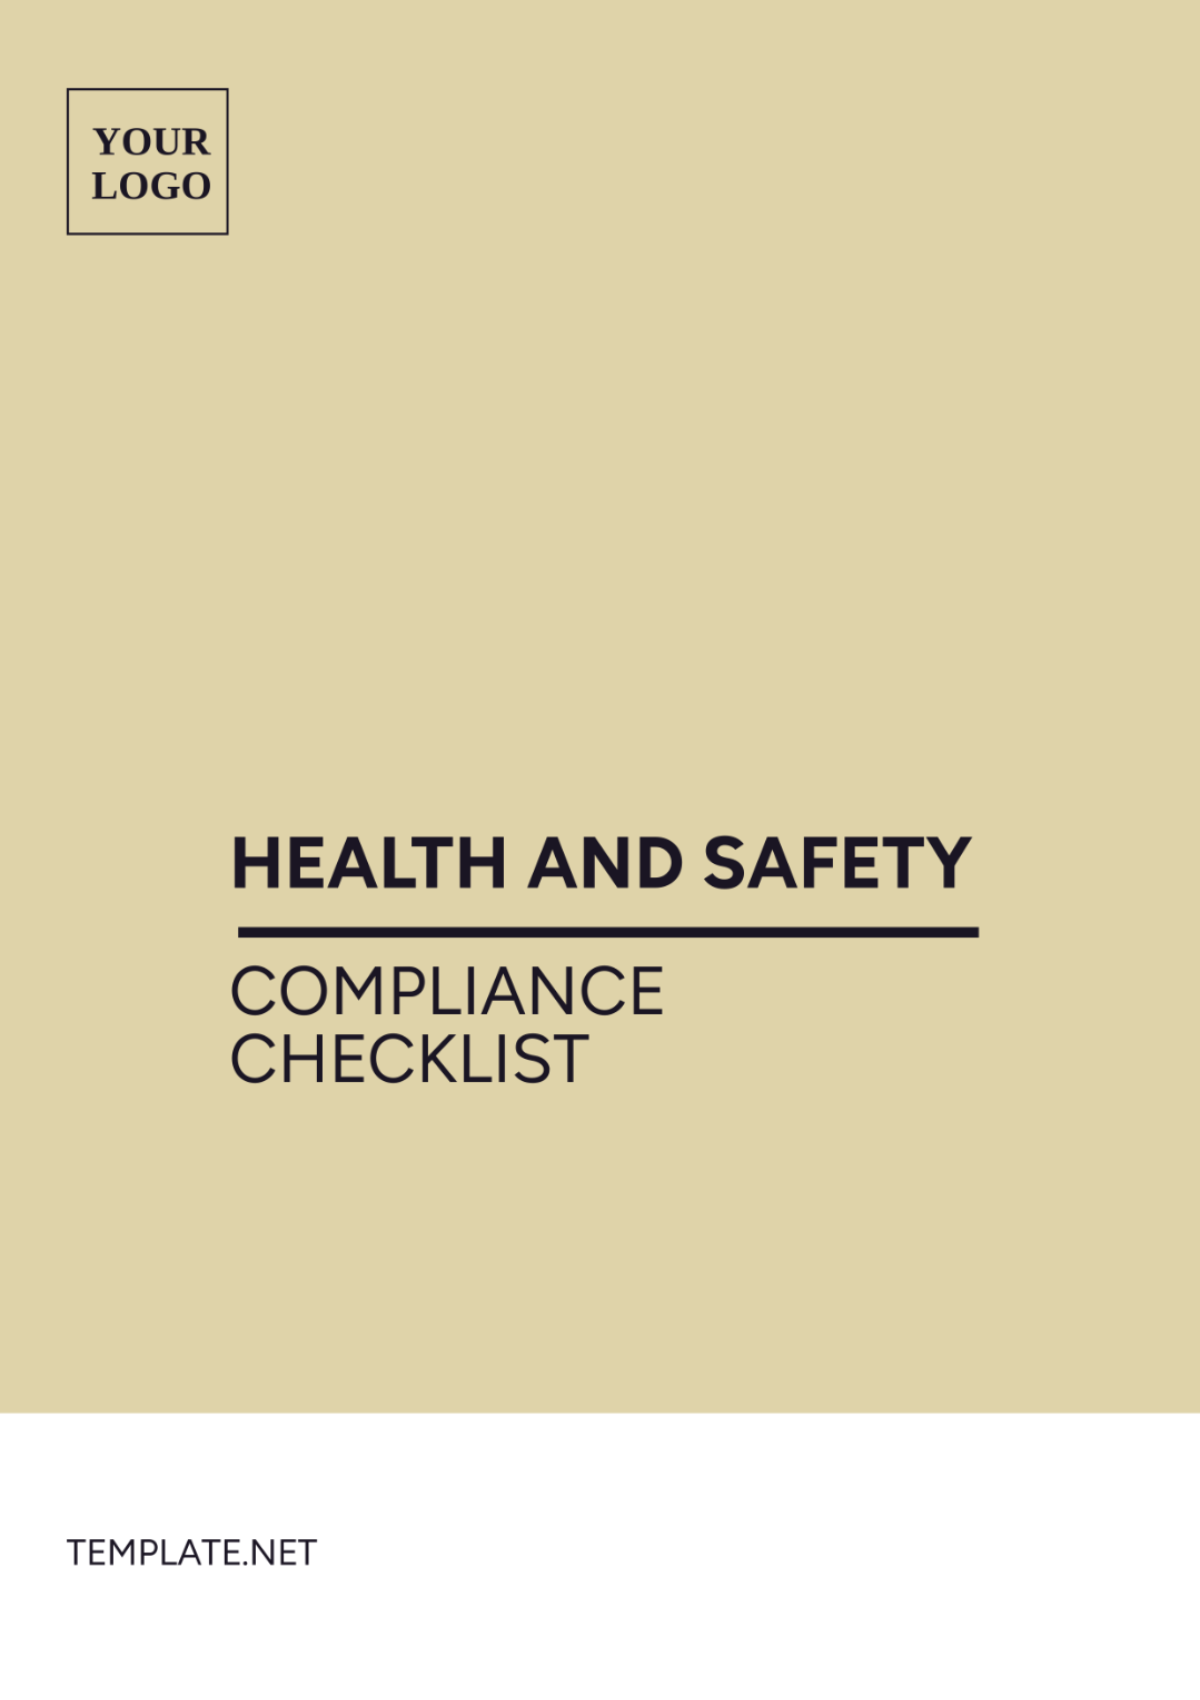 Health and Safety Compliance Checklist Template